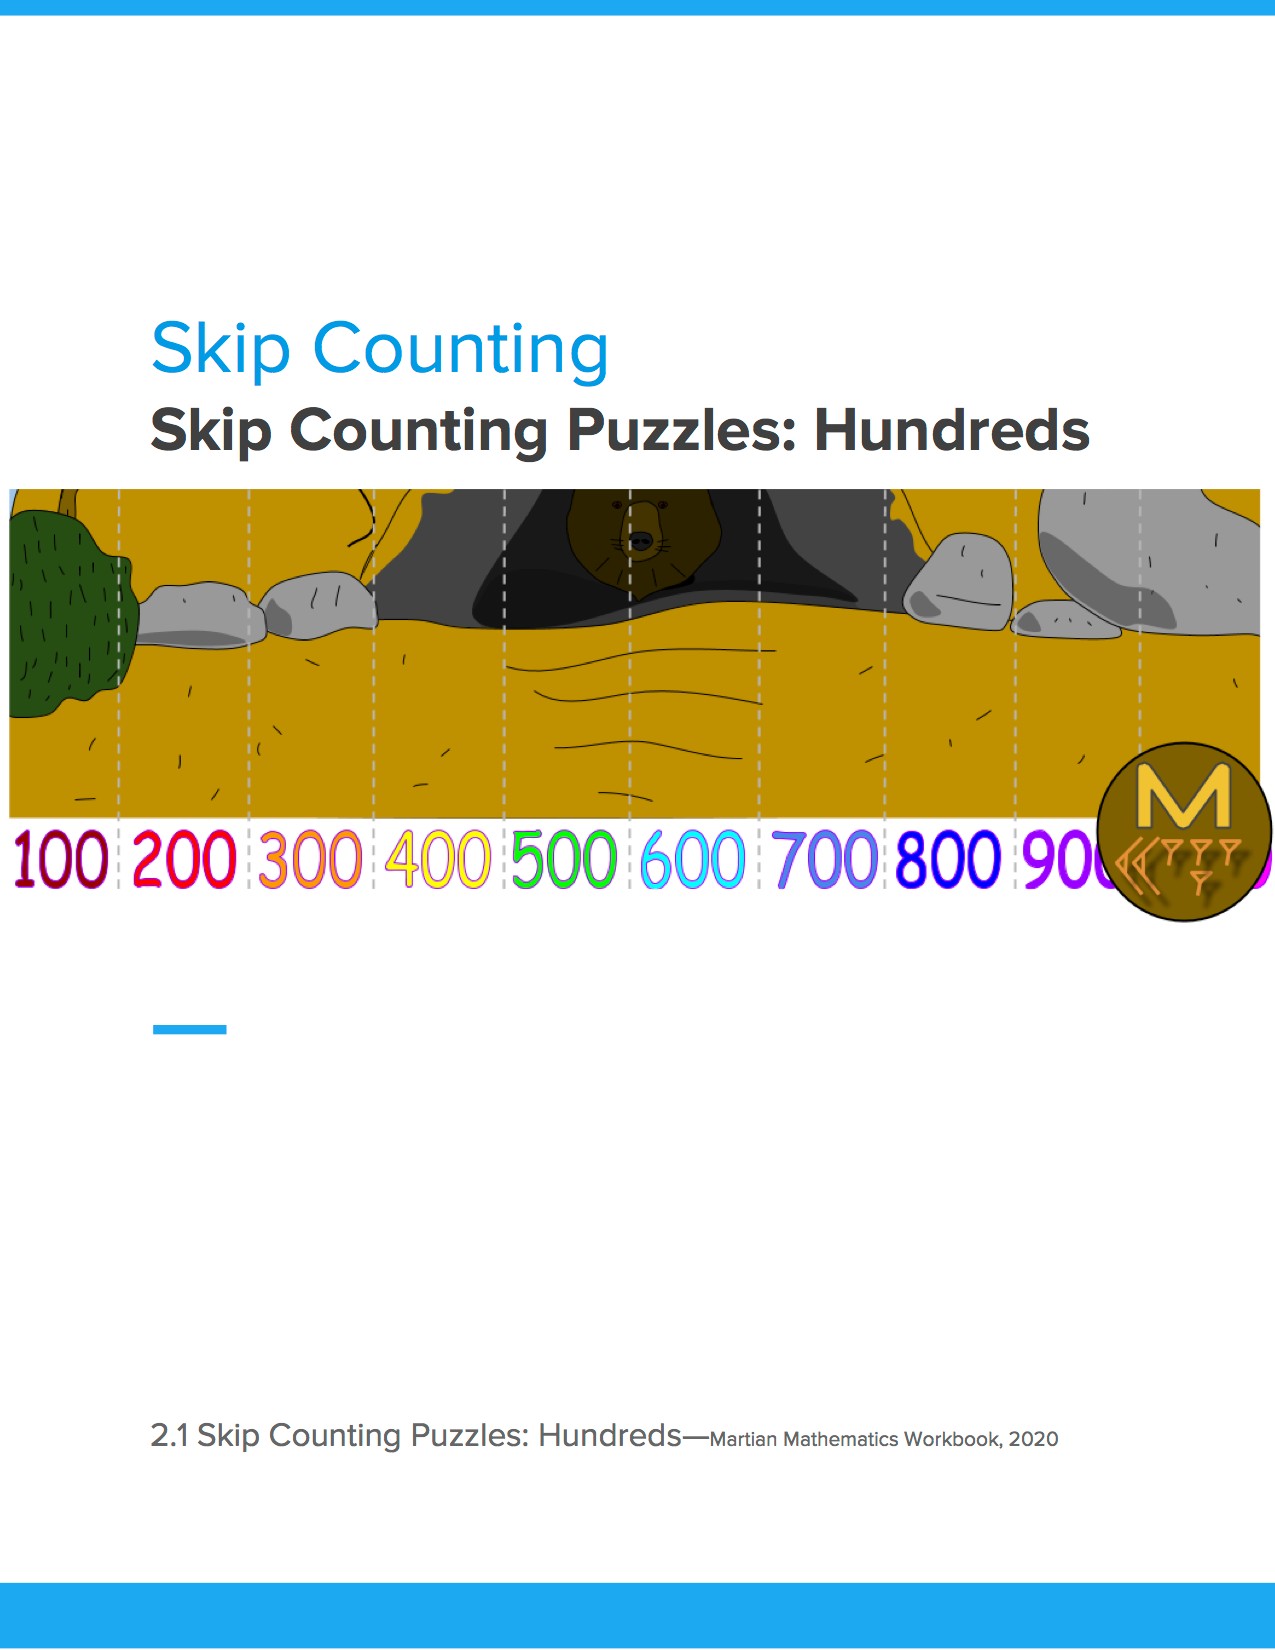 Skip Counting Puzzles: Hundreds